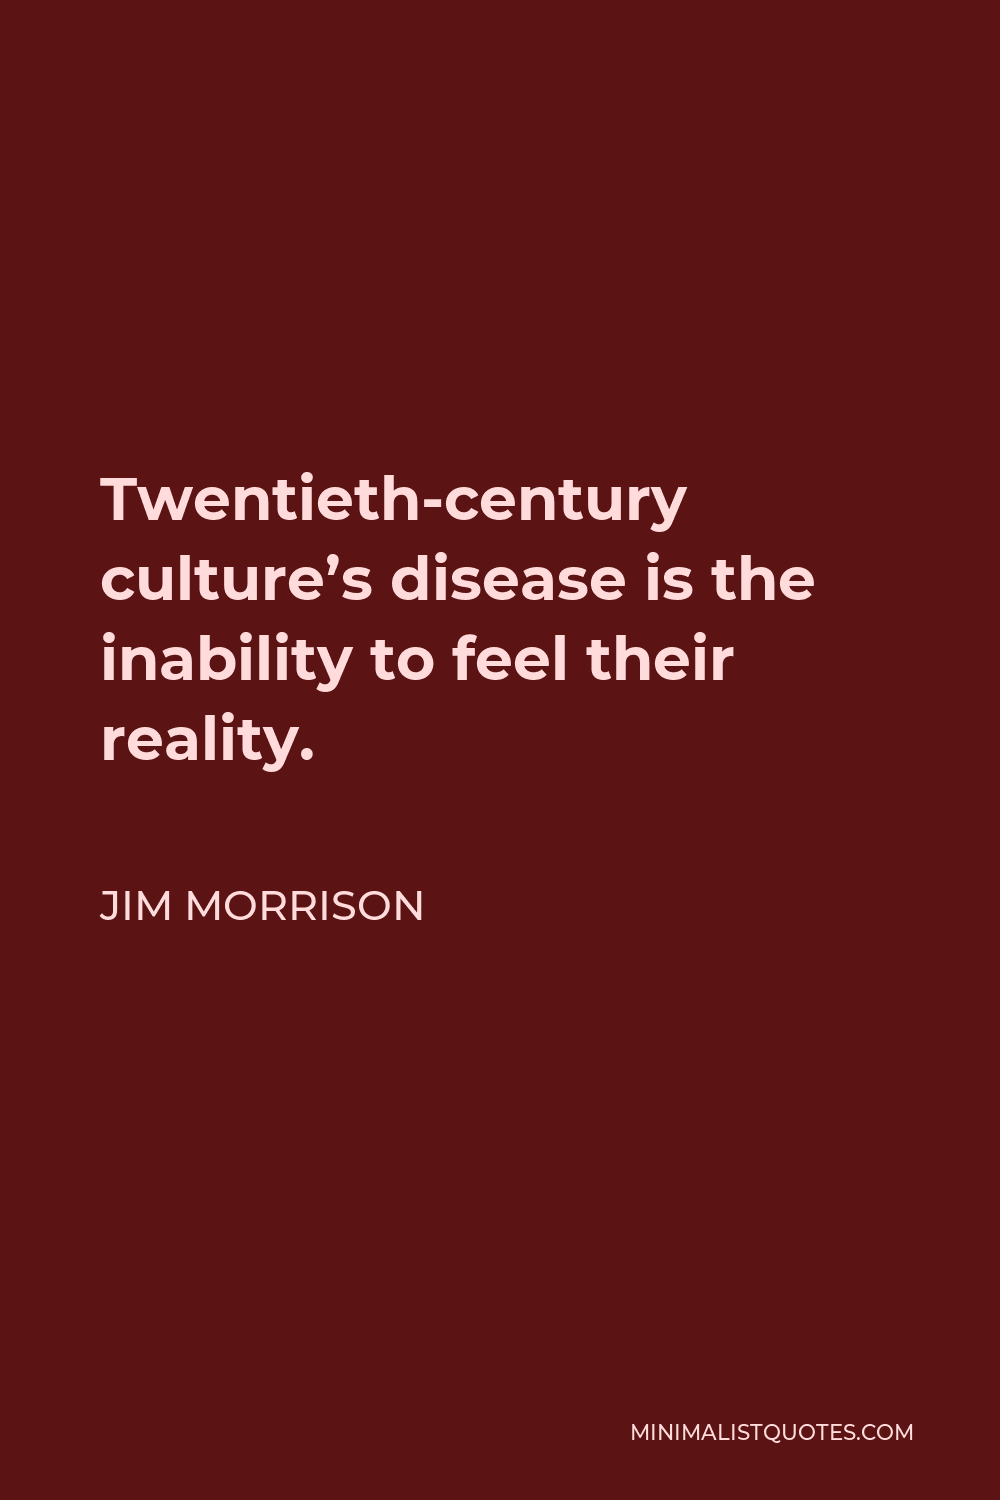 Jim Morrison Quote - Twentieth-century culture’s disease is the inability to feel their reality.